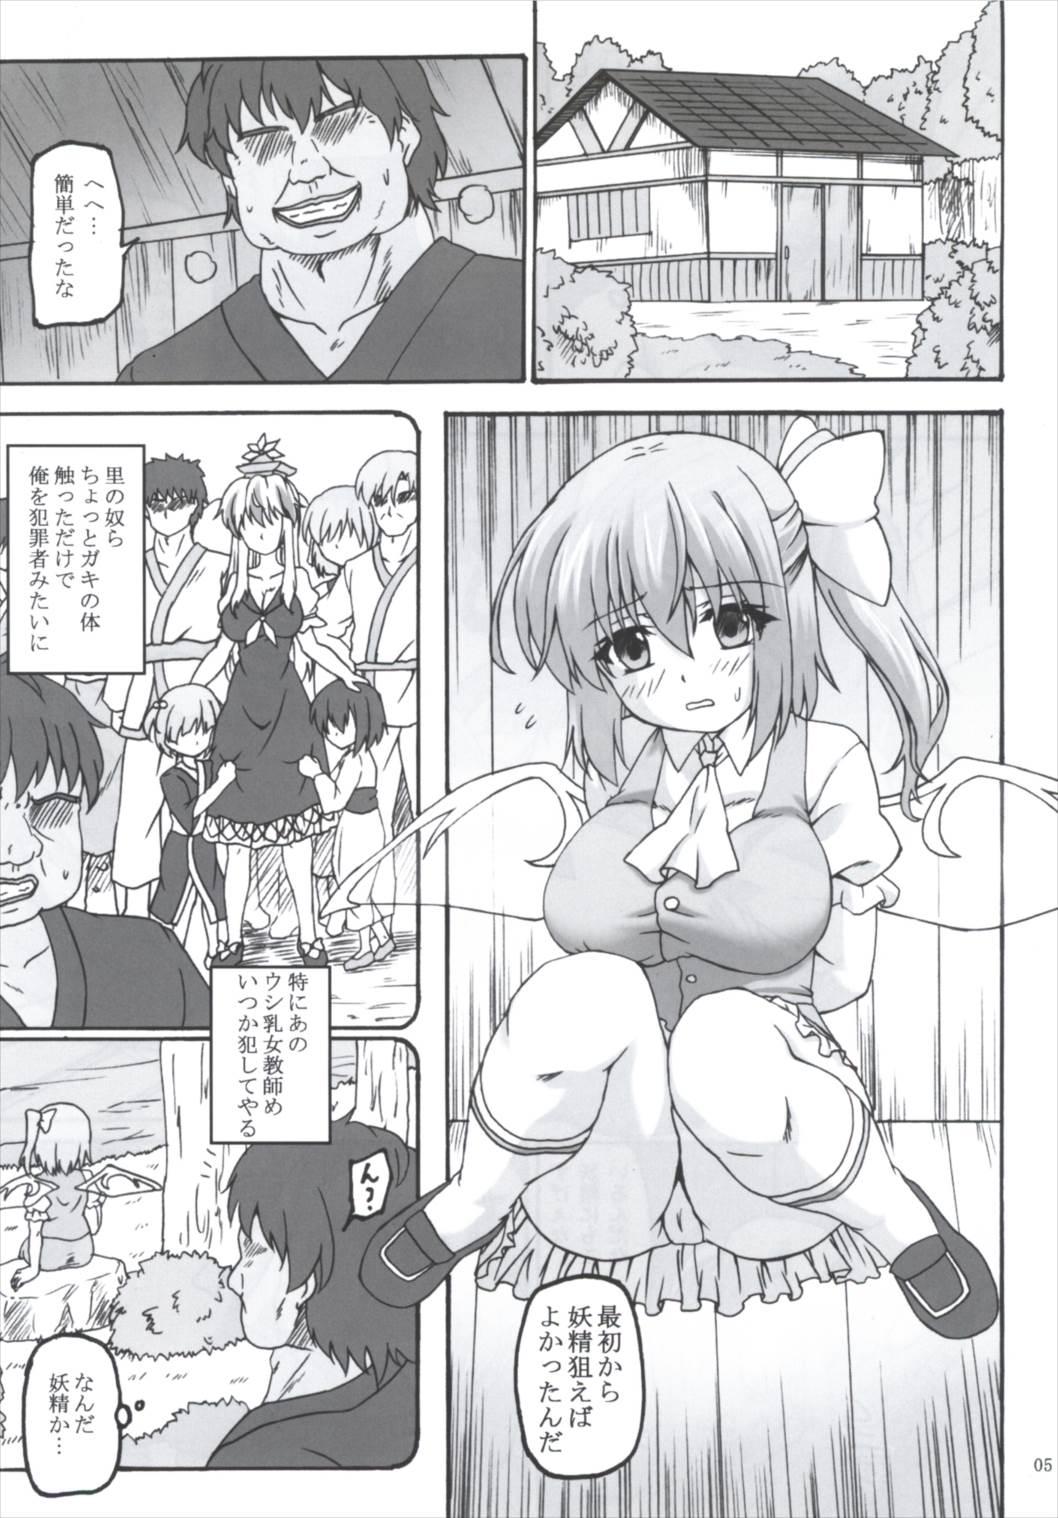 Classy Daiyousei Hyouhon - Touhou project Spain - Page 4